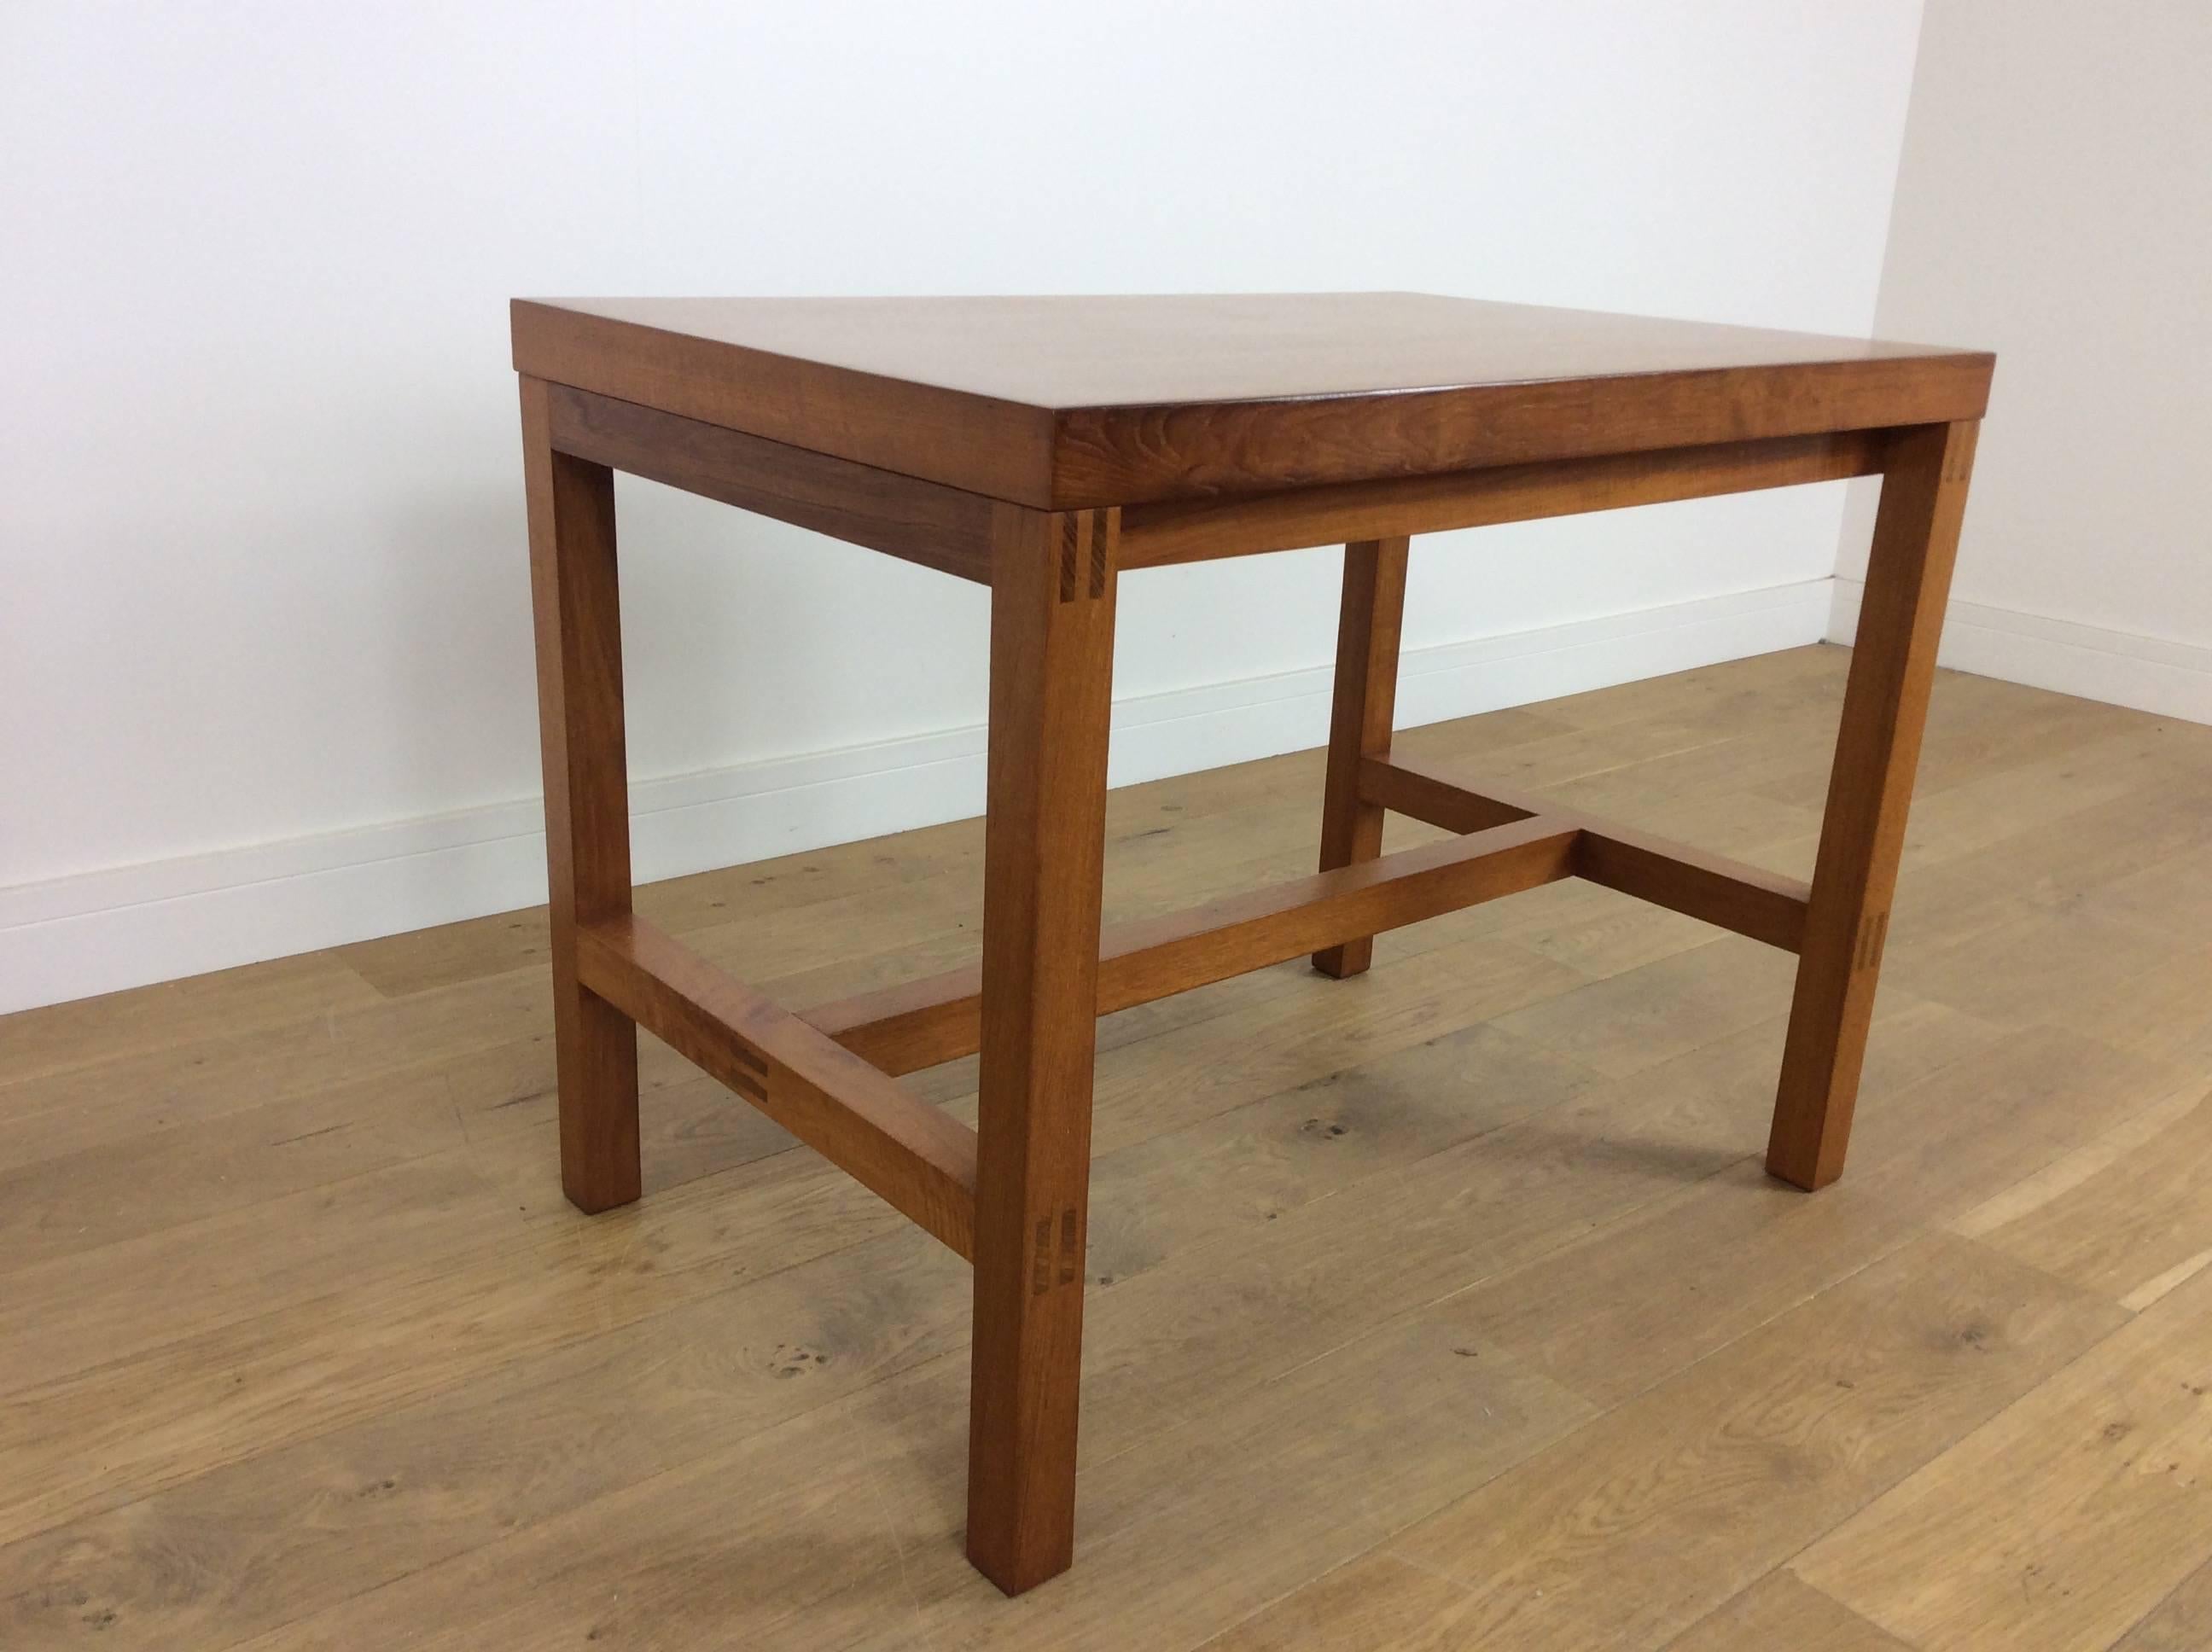 British Midcentury Table For Sale